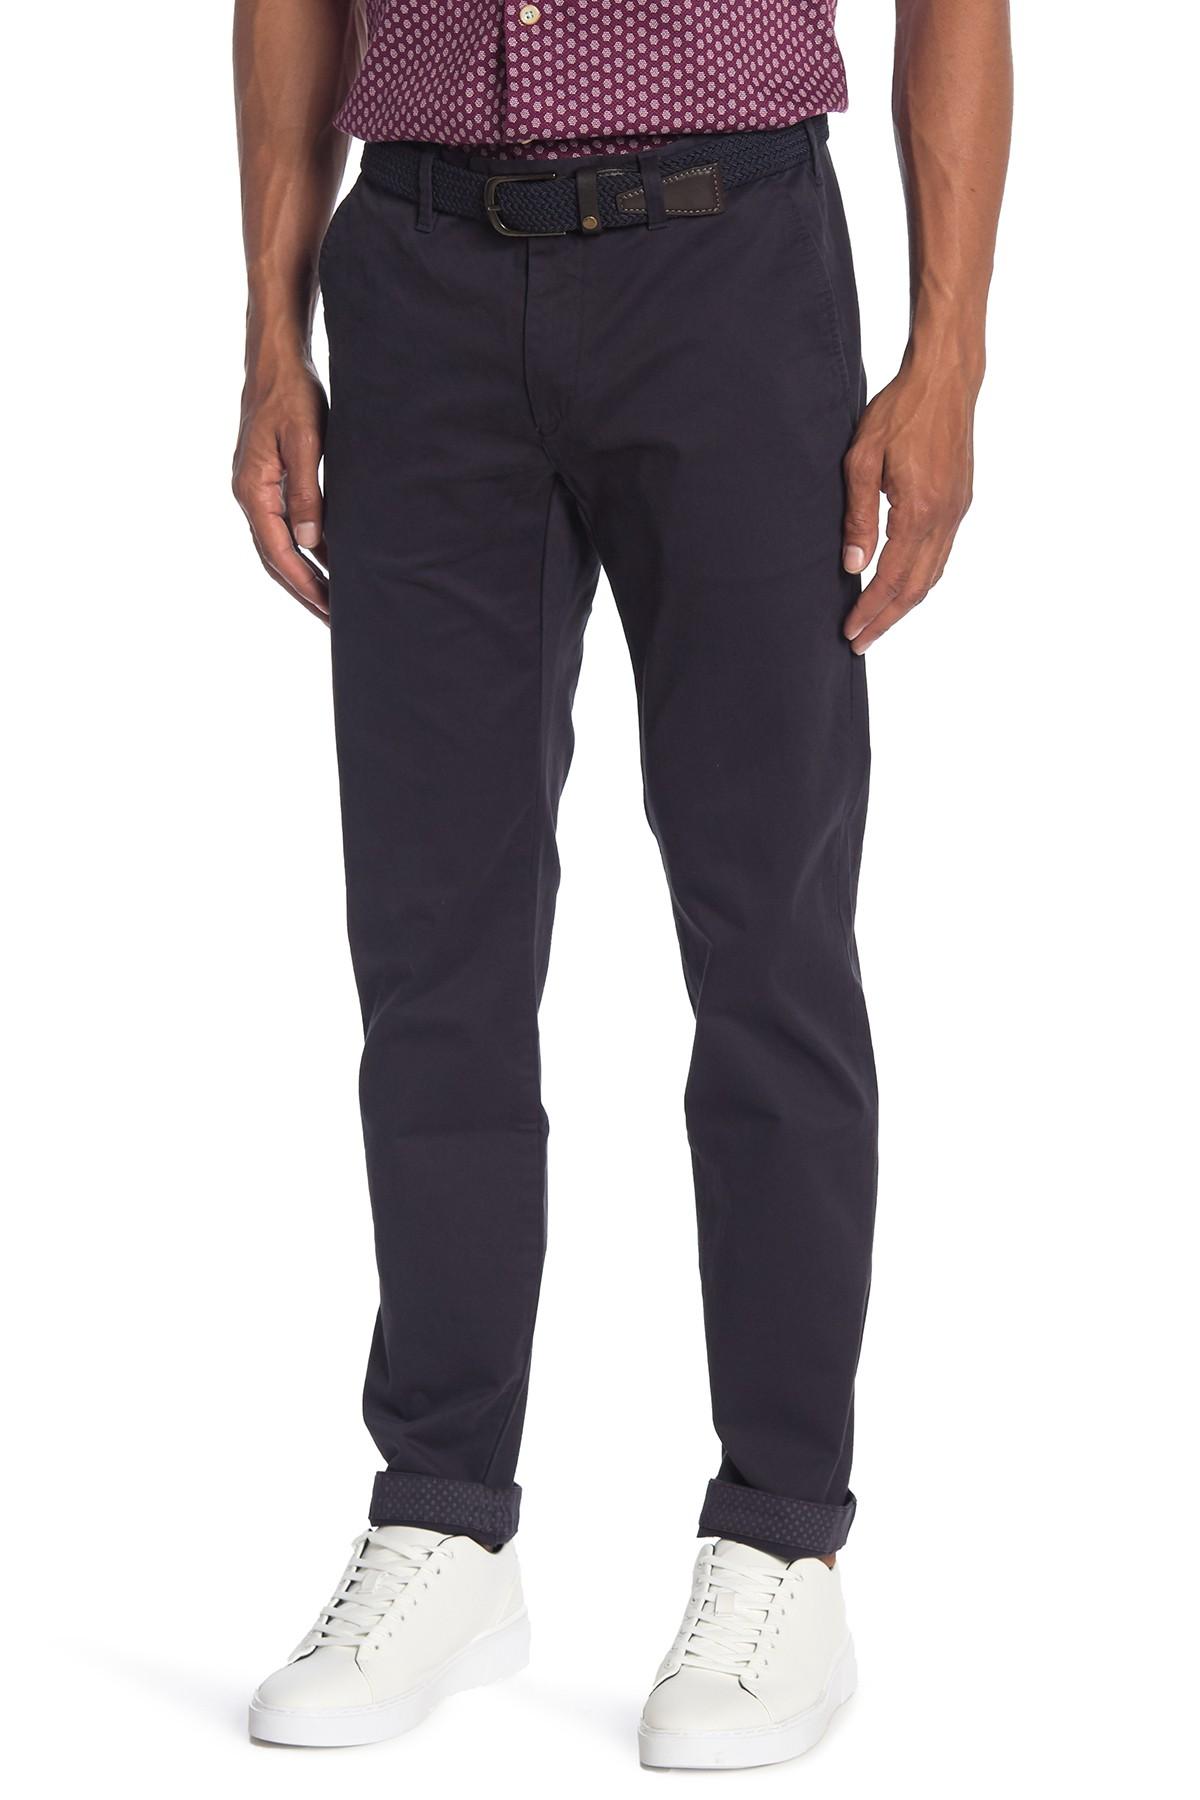 Ted Baker Slim Fit Cotton Chinos in Navy (Blue) for Men - Lyst